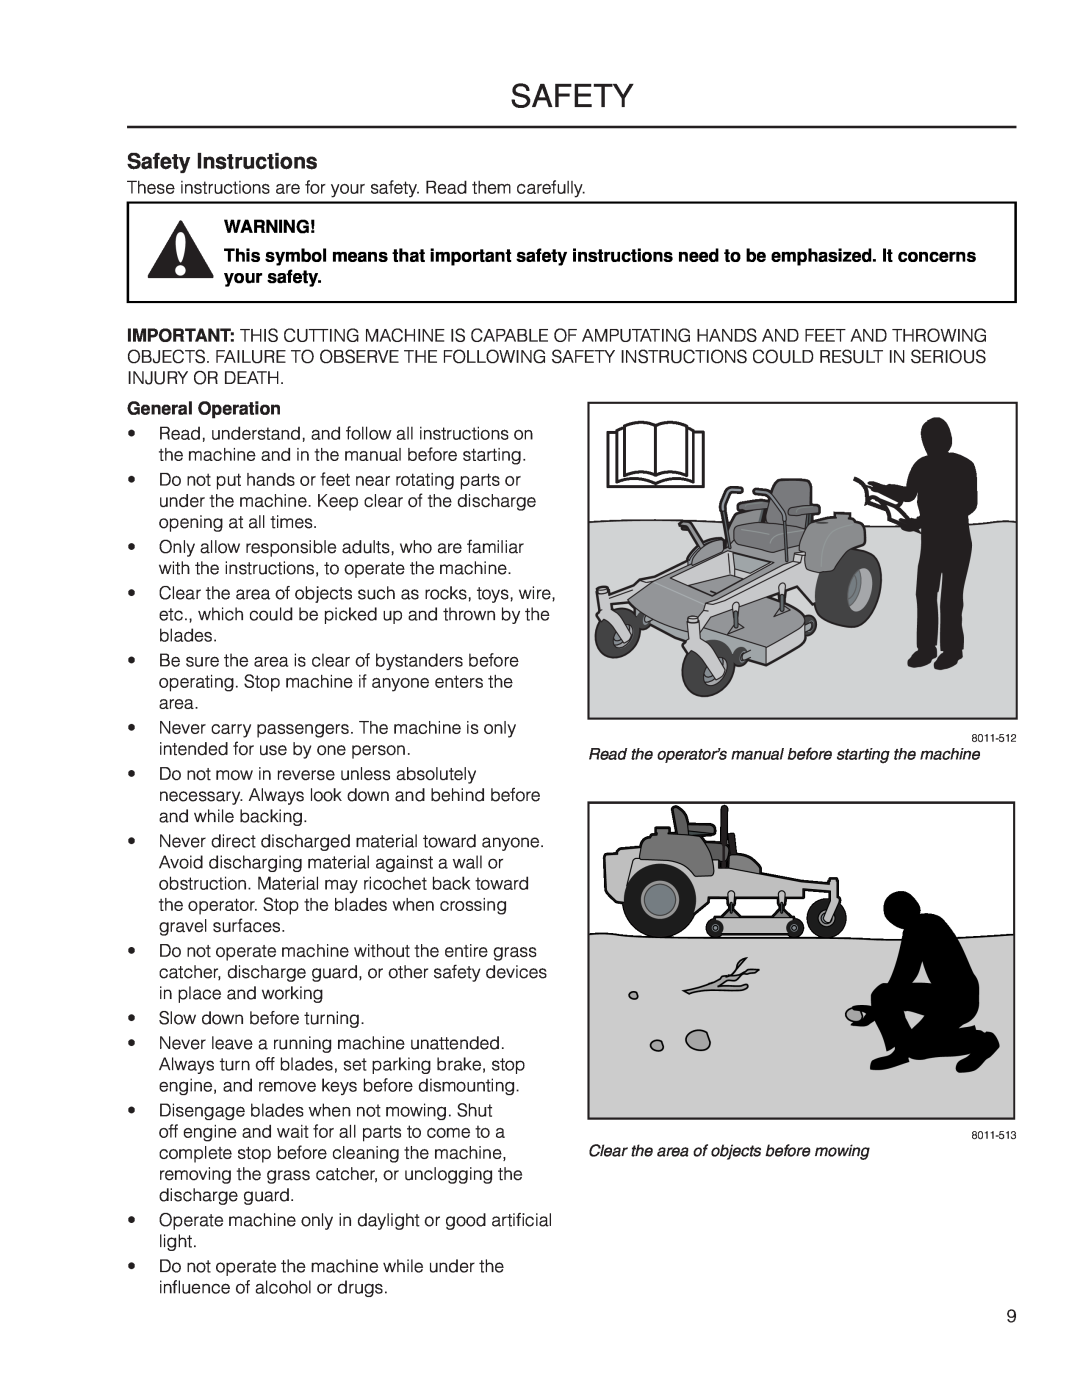 Yazoo/Kees ZMKW 6124, ZMKW 5222 manual Safety Instructions, General Operation 